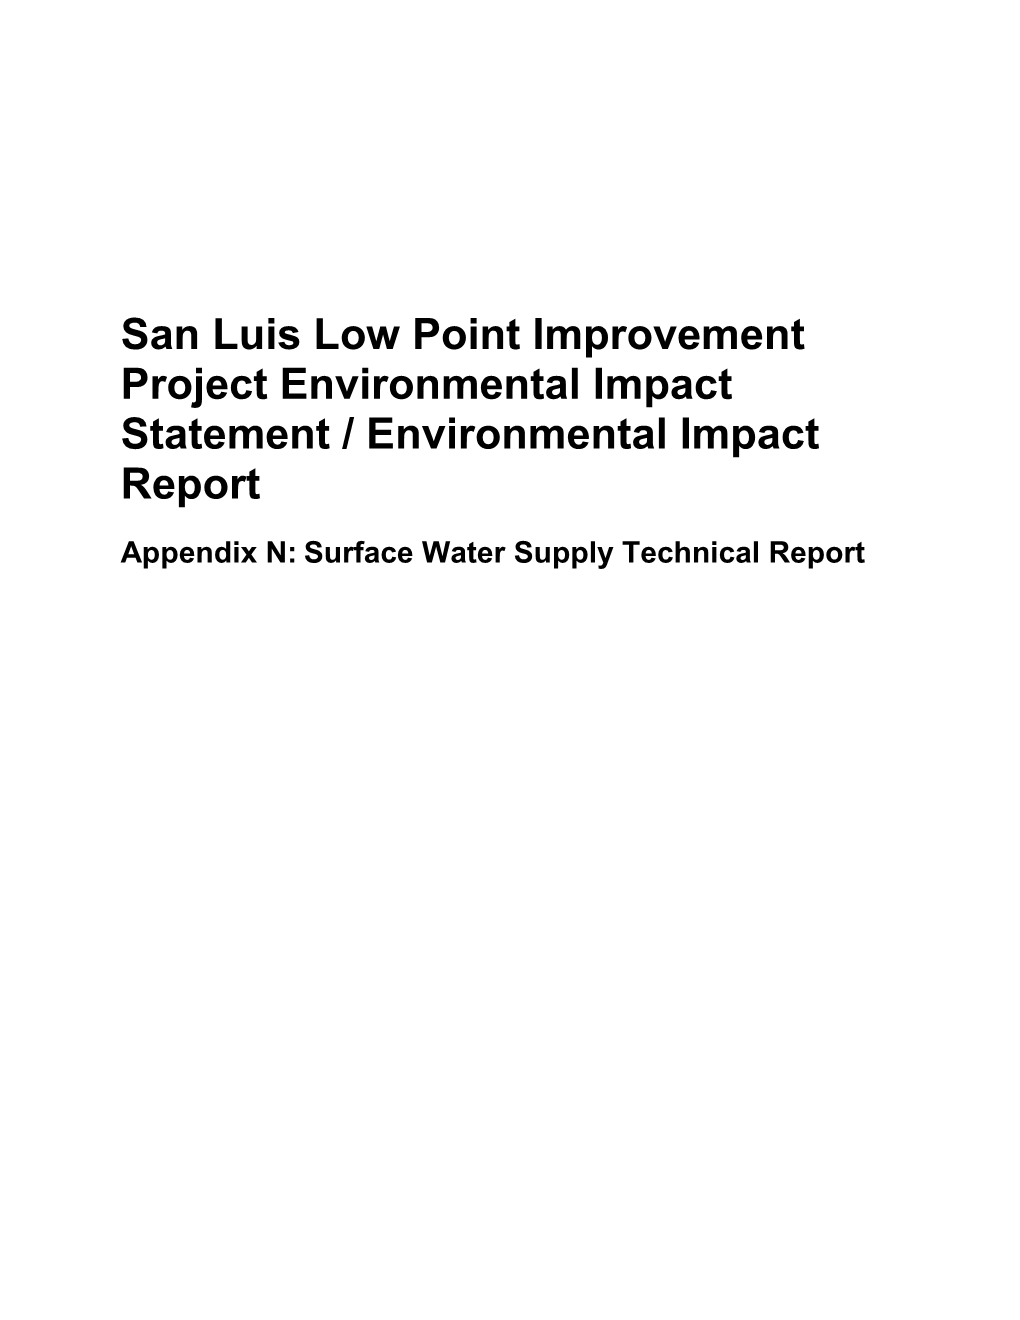 Appendix N: Surface Water Supply Technical Report